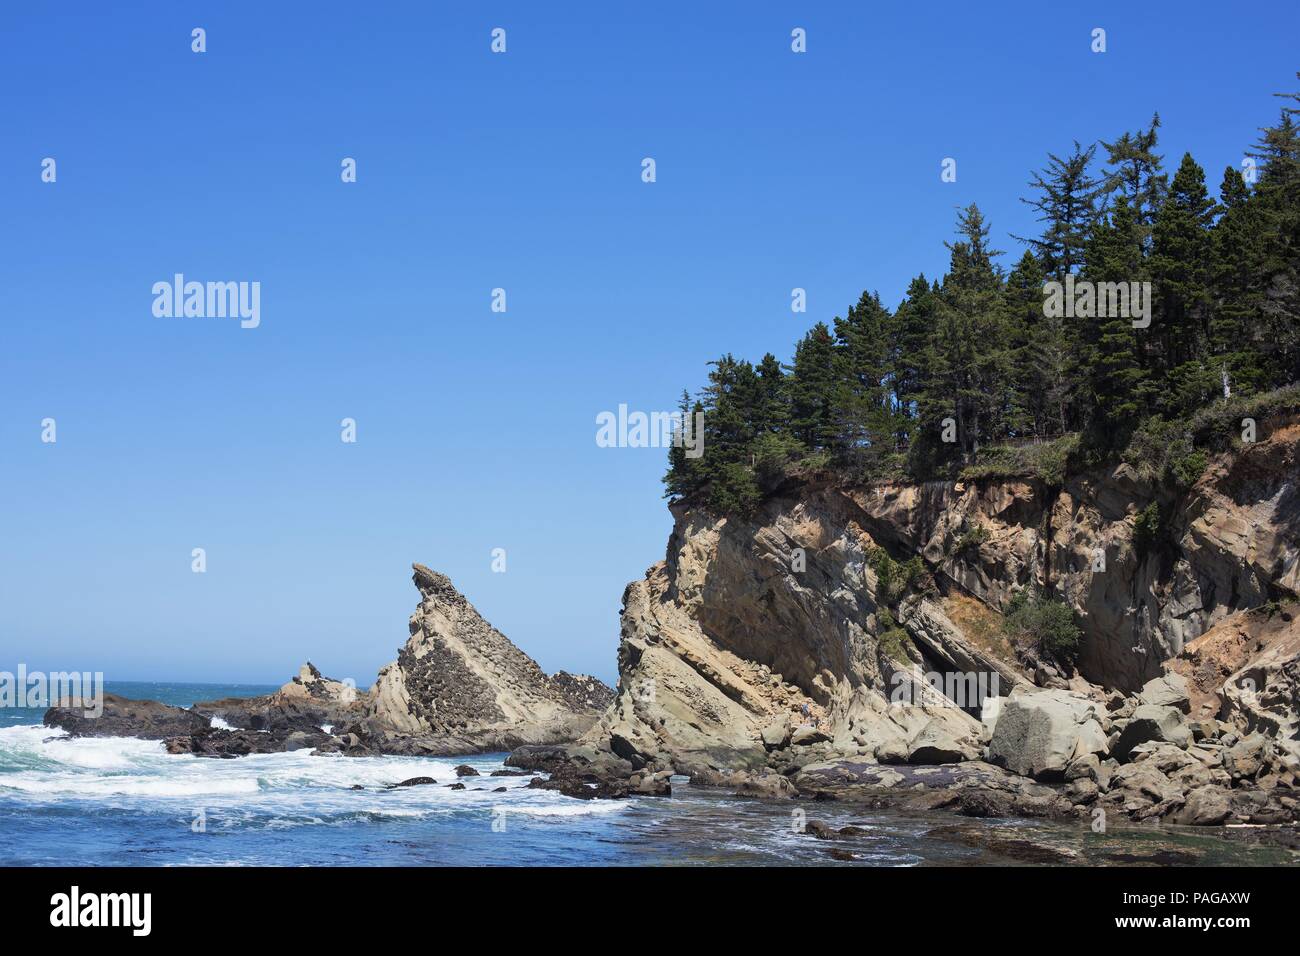 Slanted, dramatic rock formations on the coast at Shore Acres State Park near Coos Bay, Oregon, USA. Stock Photo